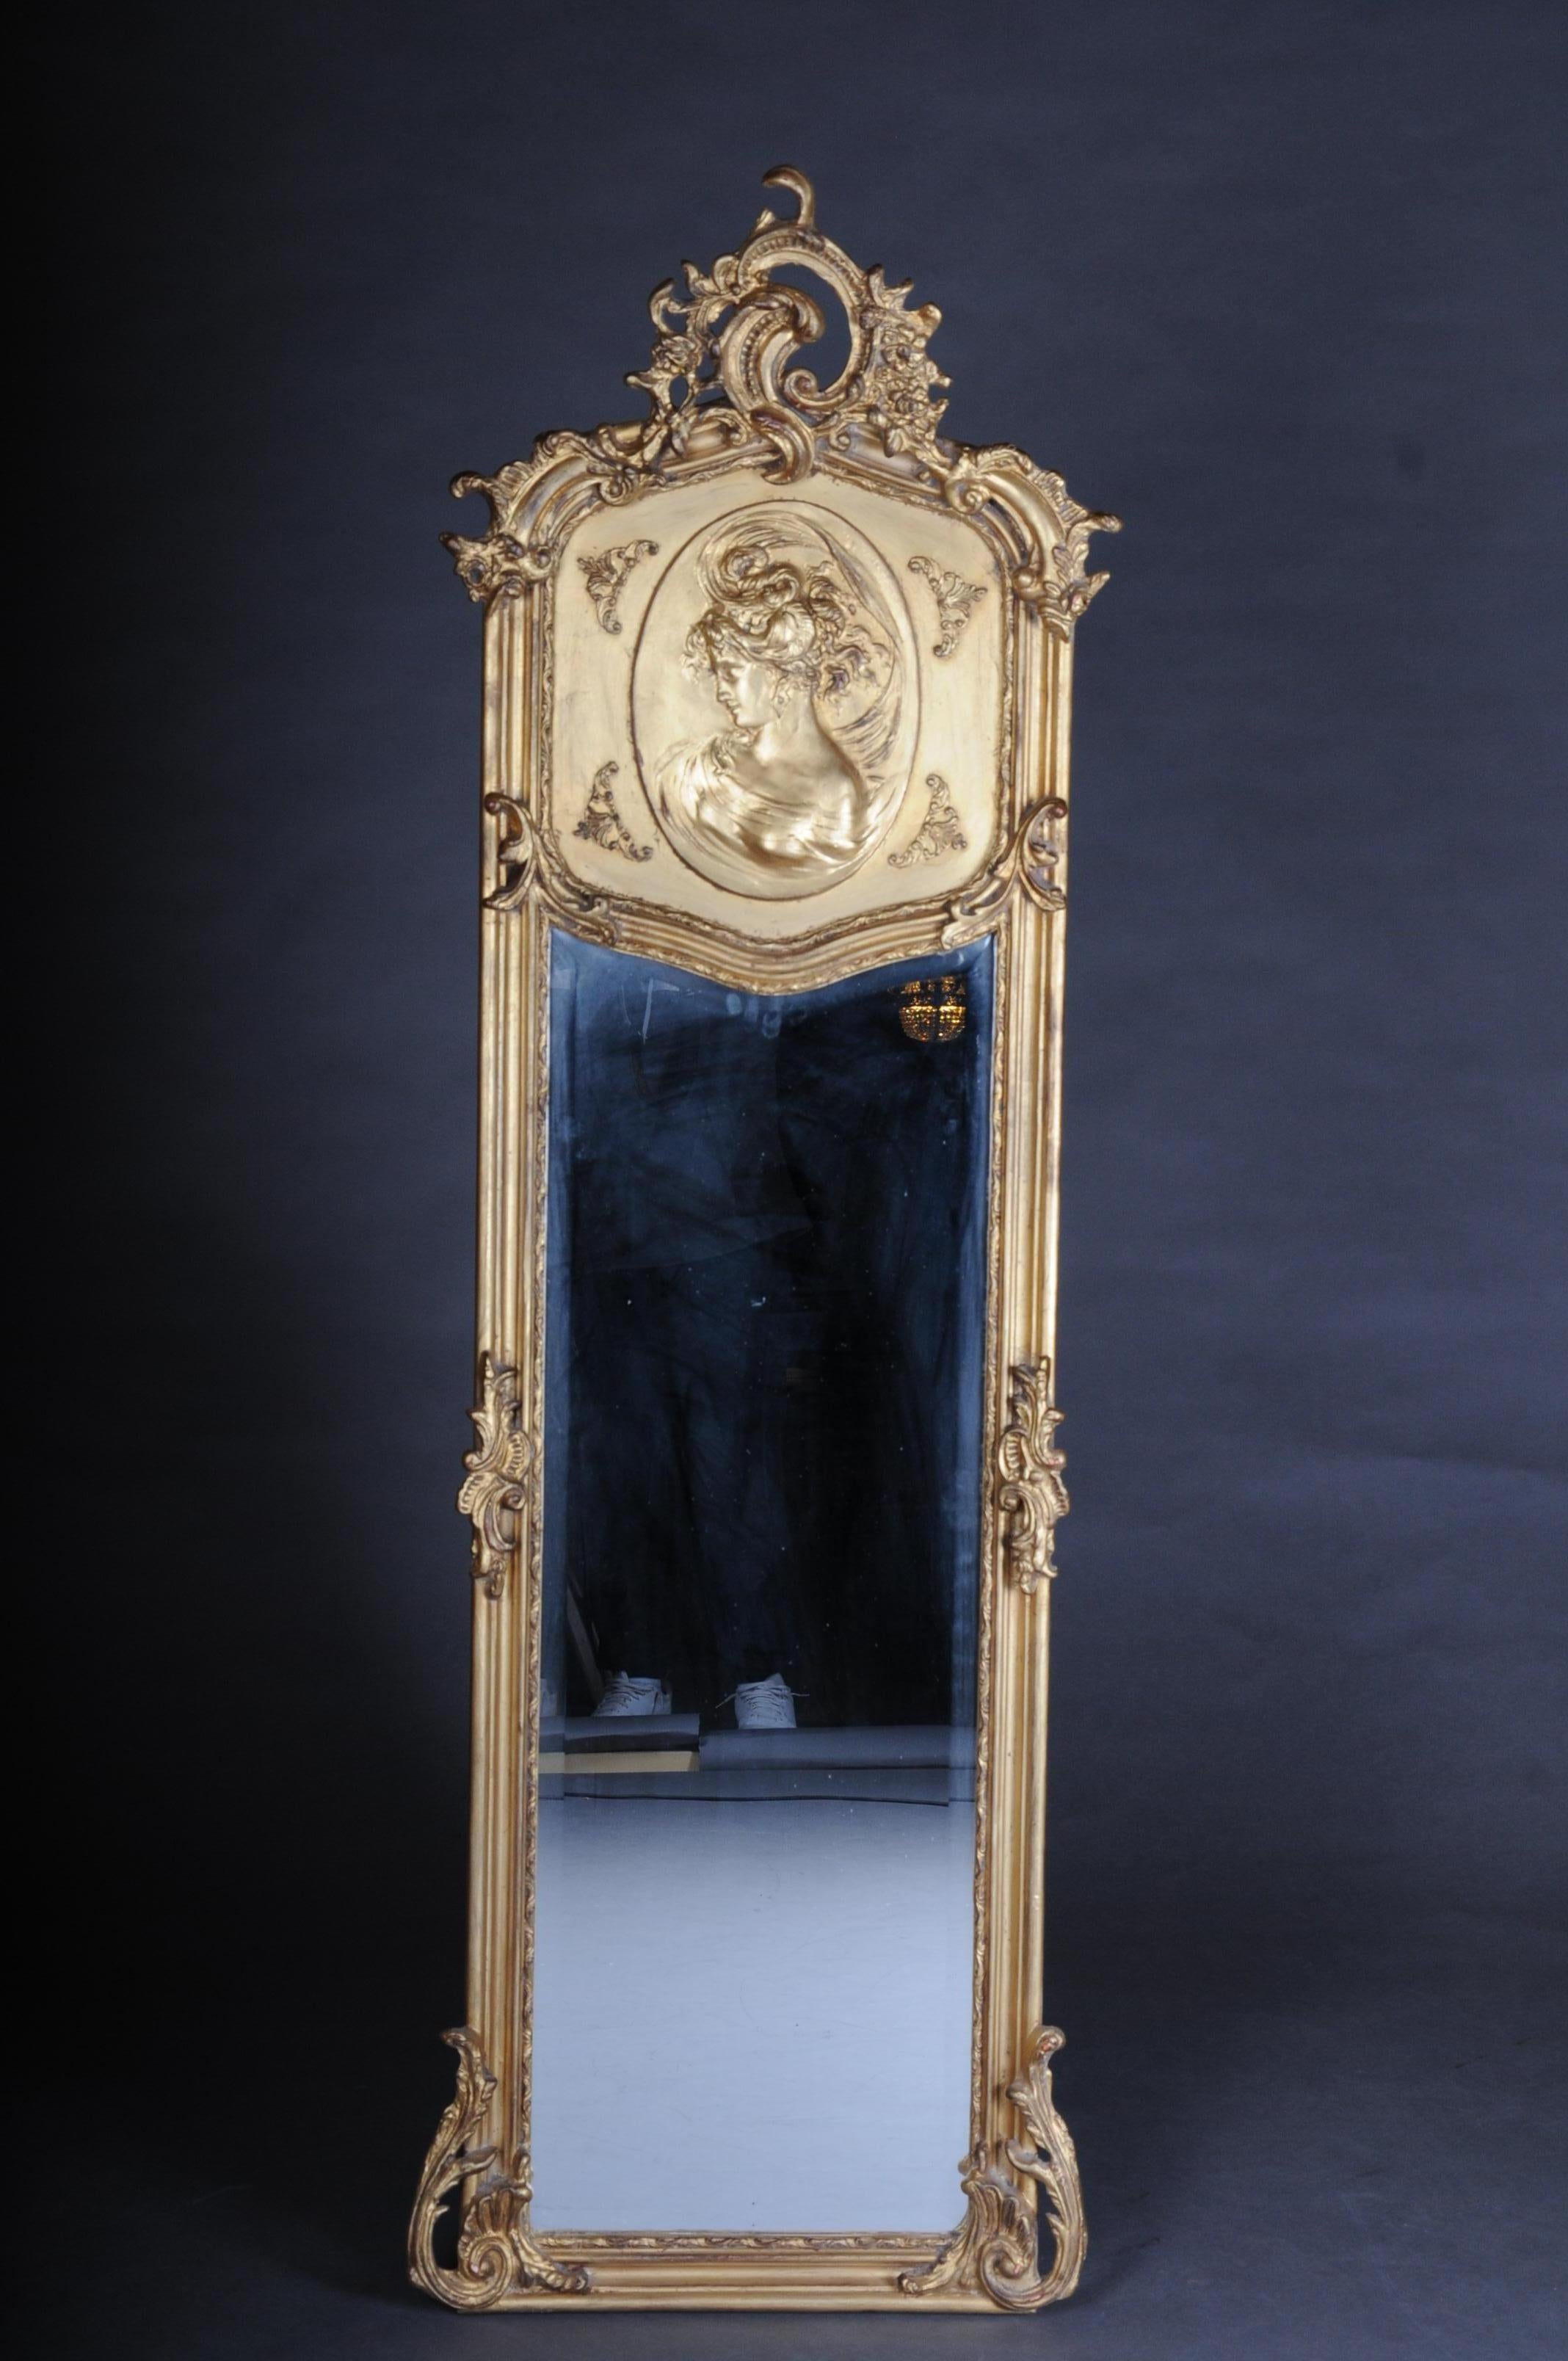 Pair of mirrors or wall mirror in Louis XV / Baroque style

Solid wood, gilded. High rectangular profiled mirror frame. Gable box with plastic crowning of medallion-shaped cartridges and plastic rocaille crowning. Centred mirror glass. Beautiful